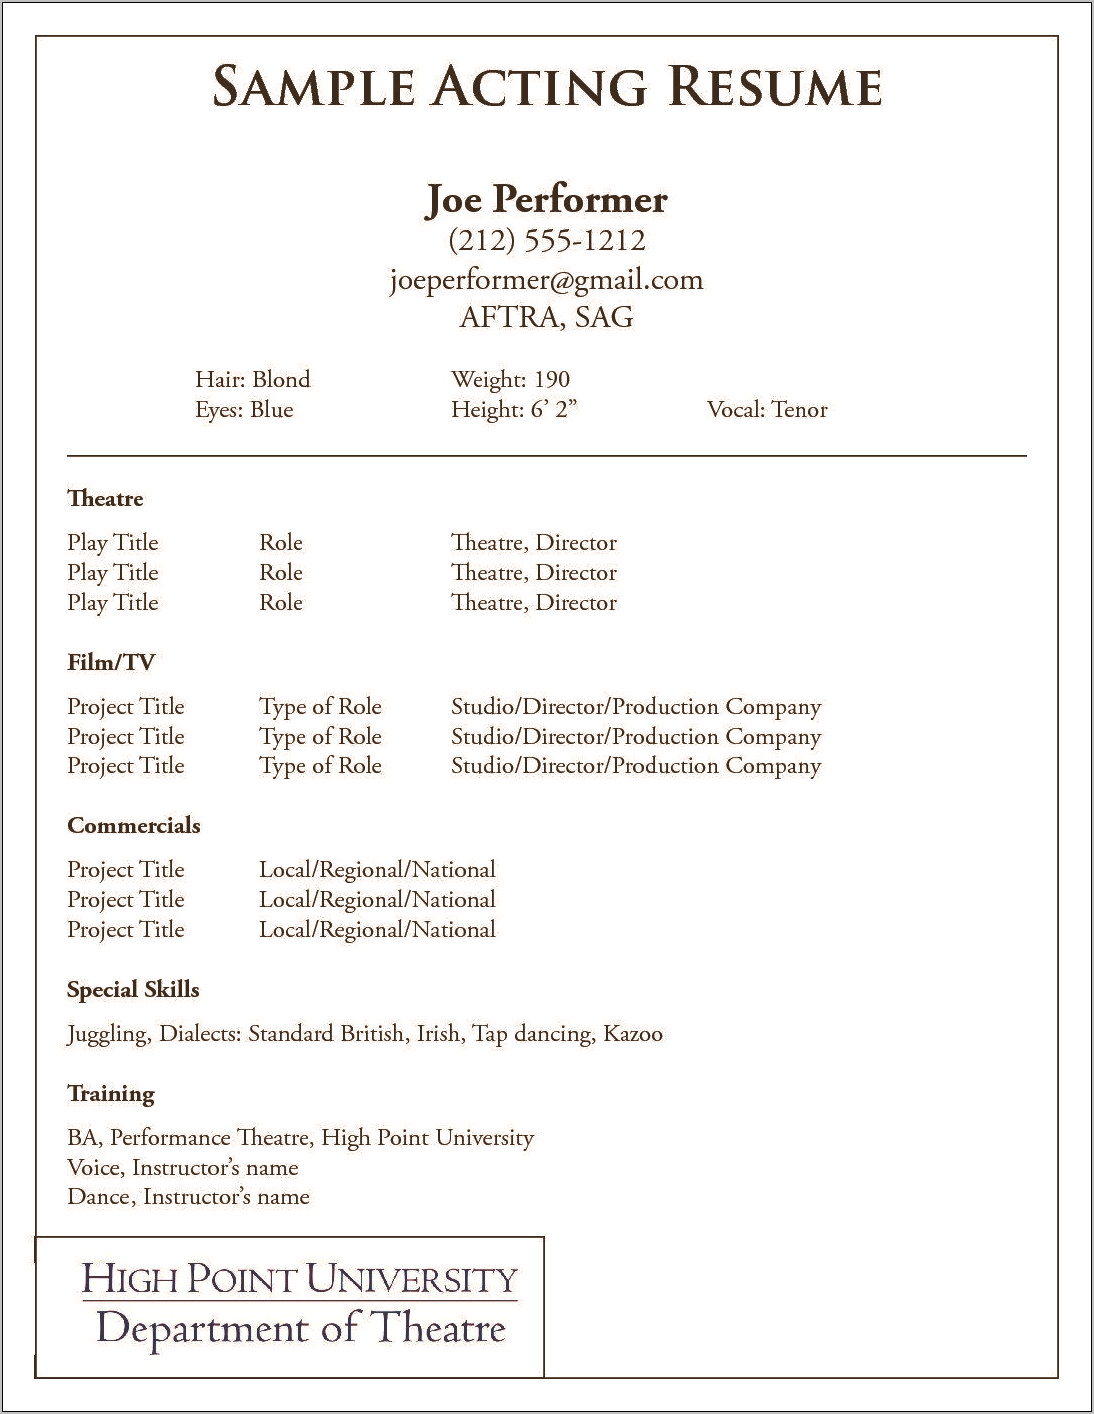 Example Of Special Skills On Theatre Resume